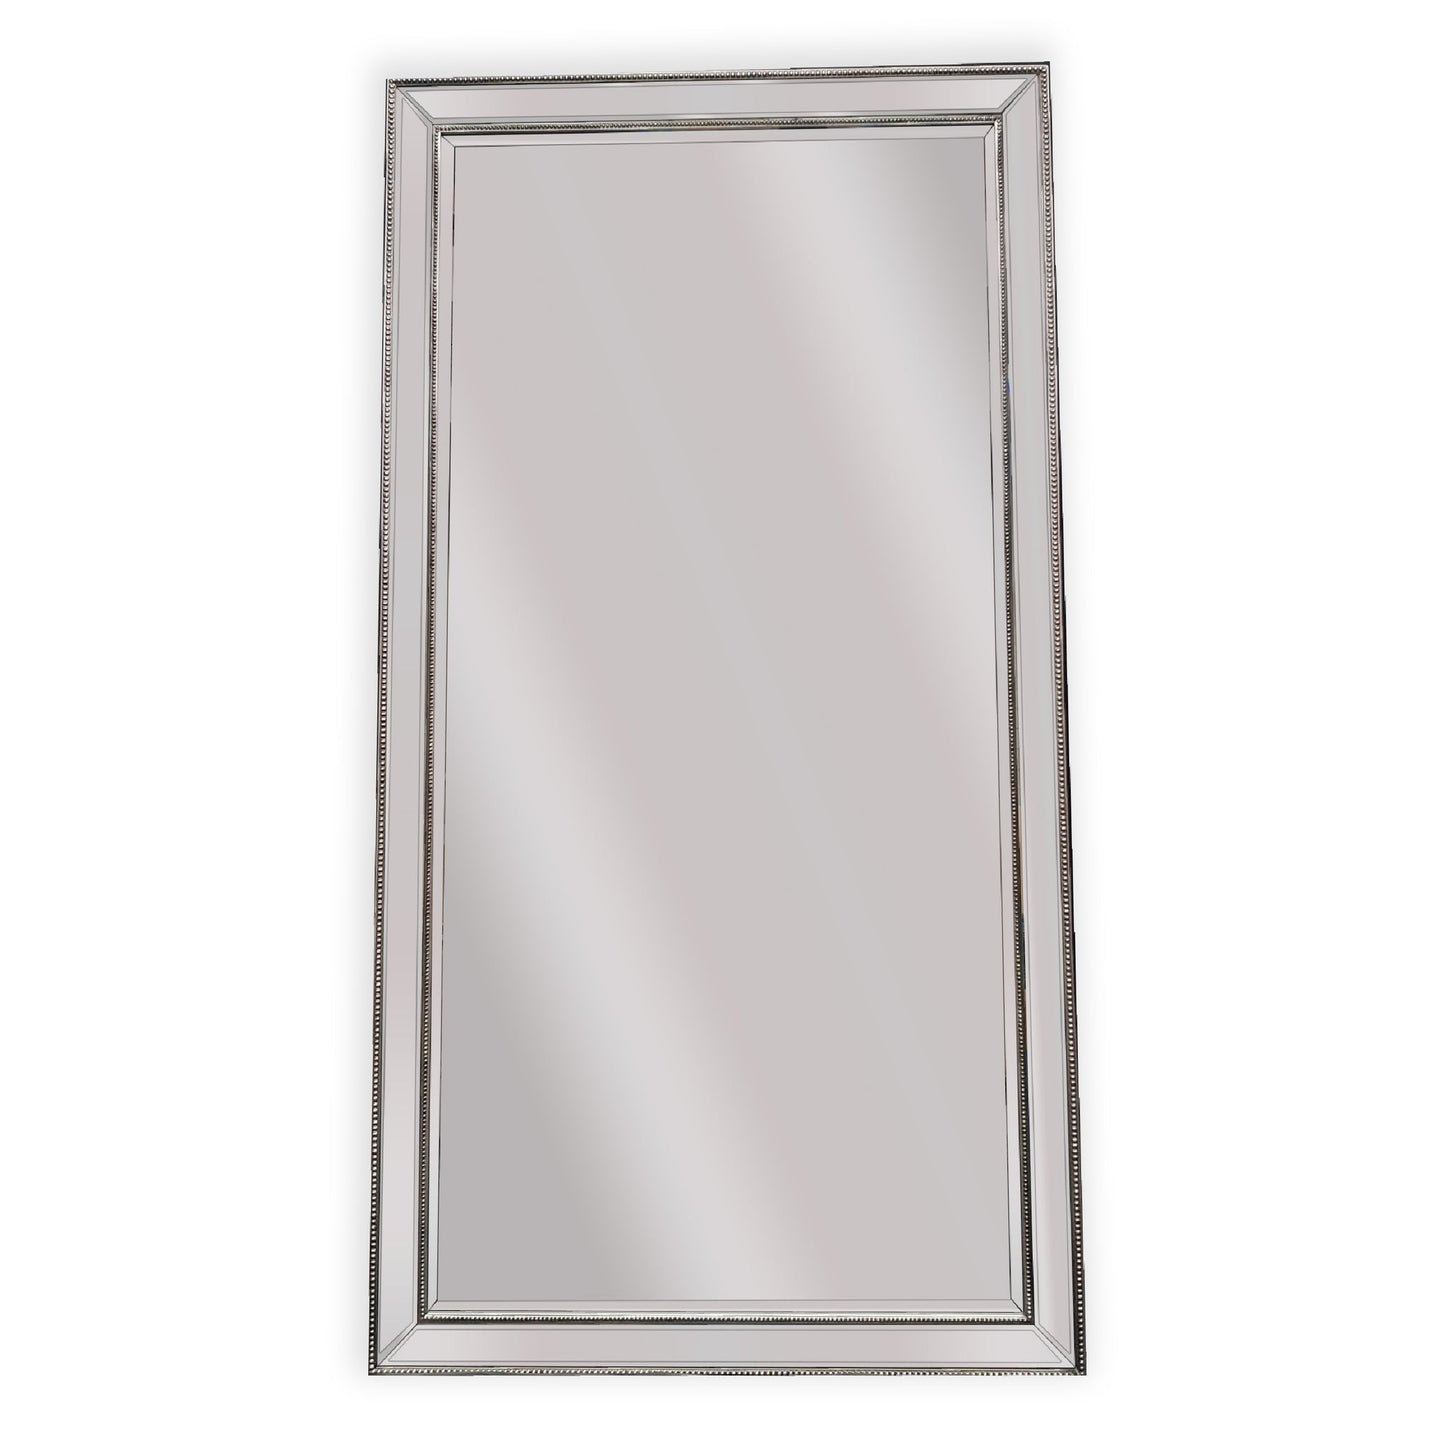 Silver Beaded Framed Mirror - X Large 190cm x 100cm - image1